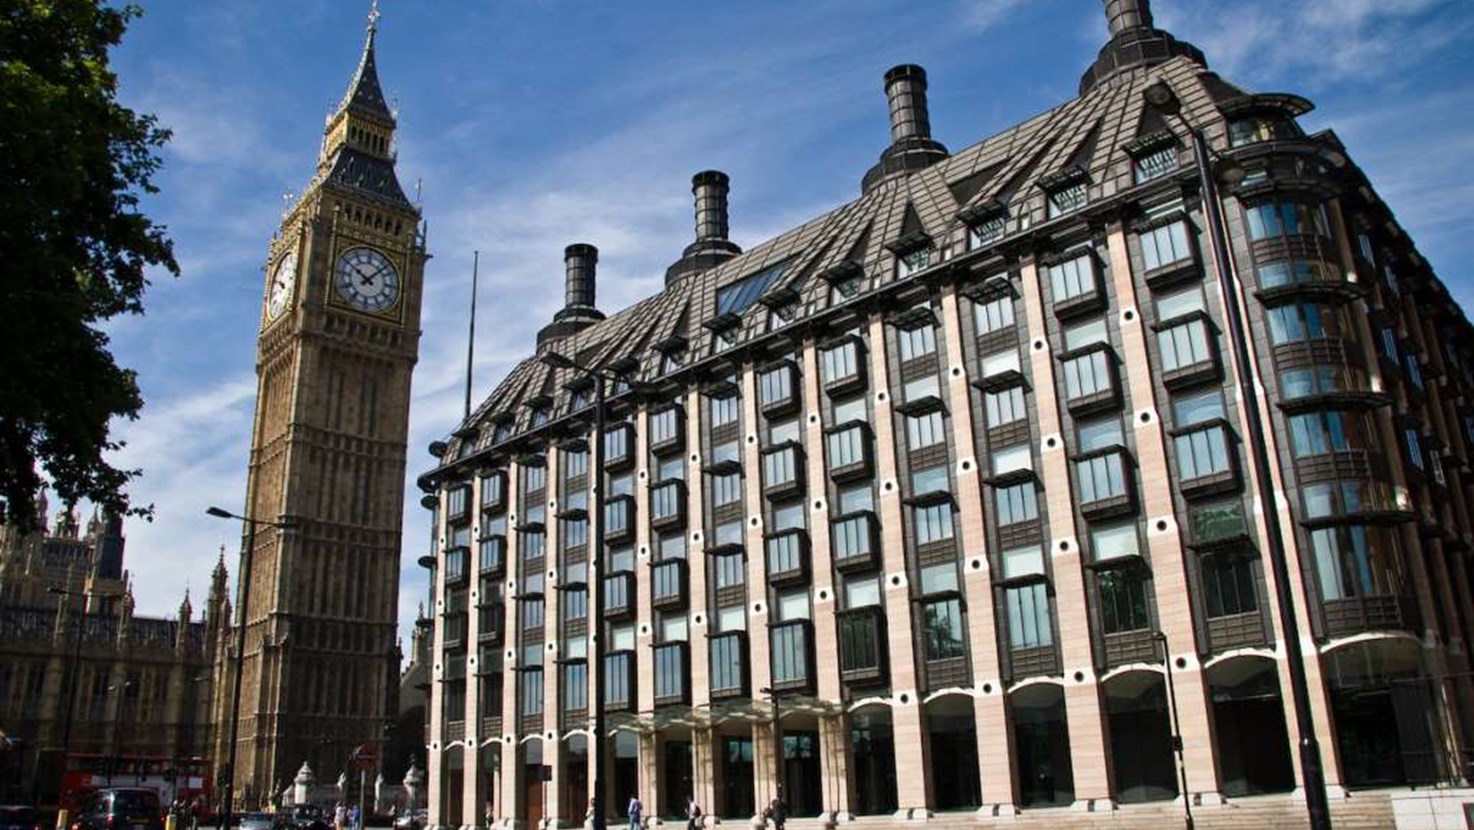 View all of the events and meetings that PCC Marc Jones attended or hosted at Portcullis House in 2022